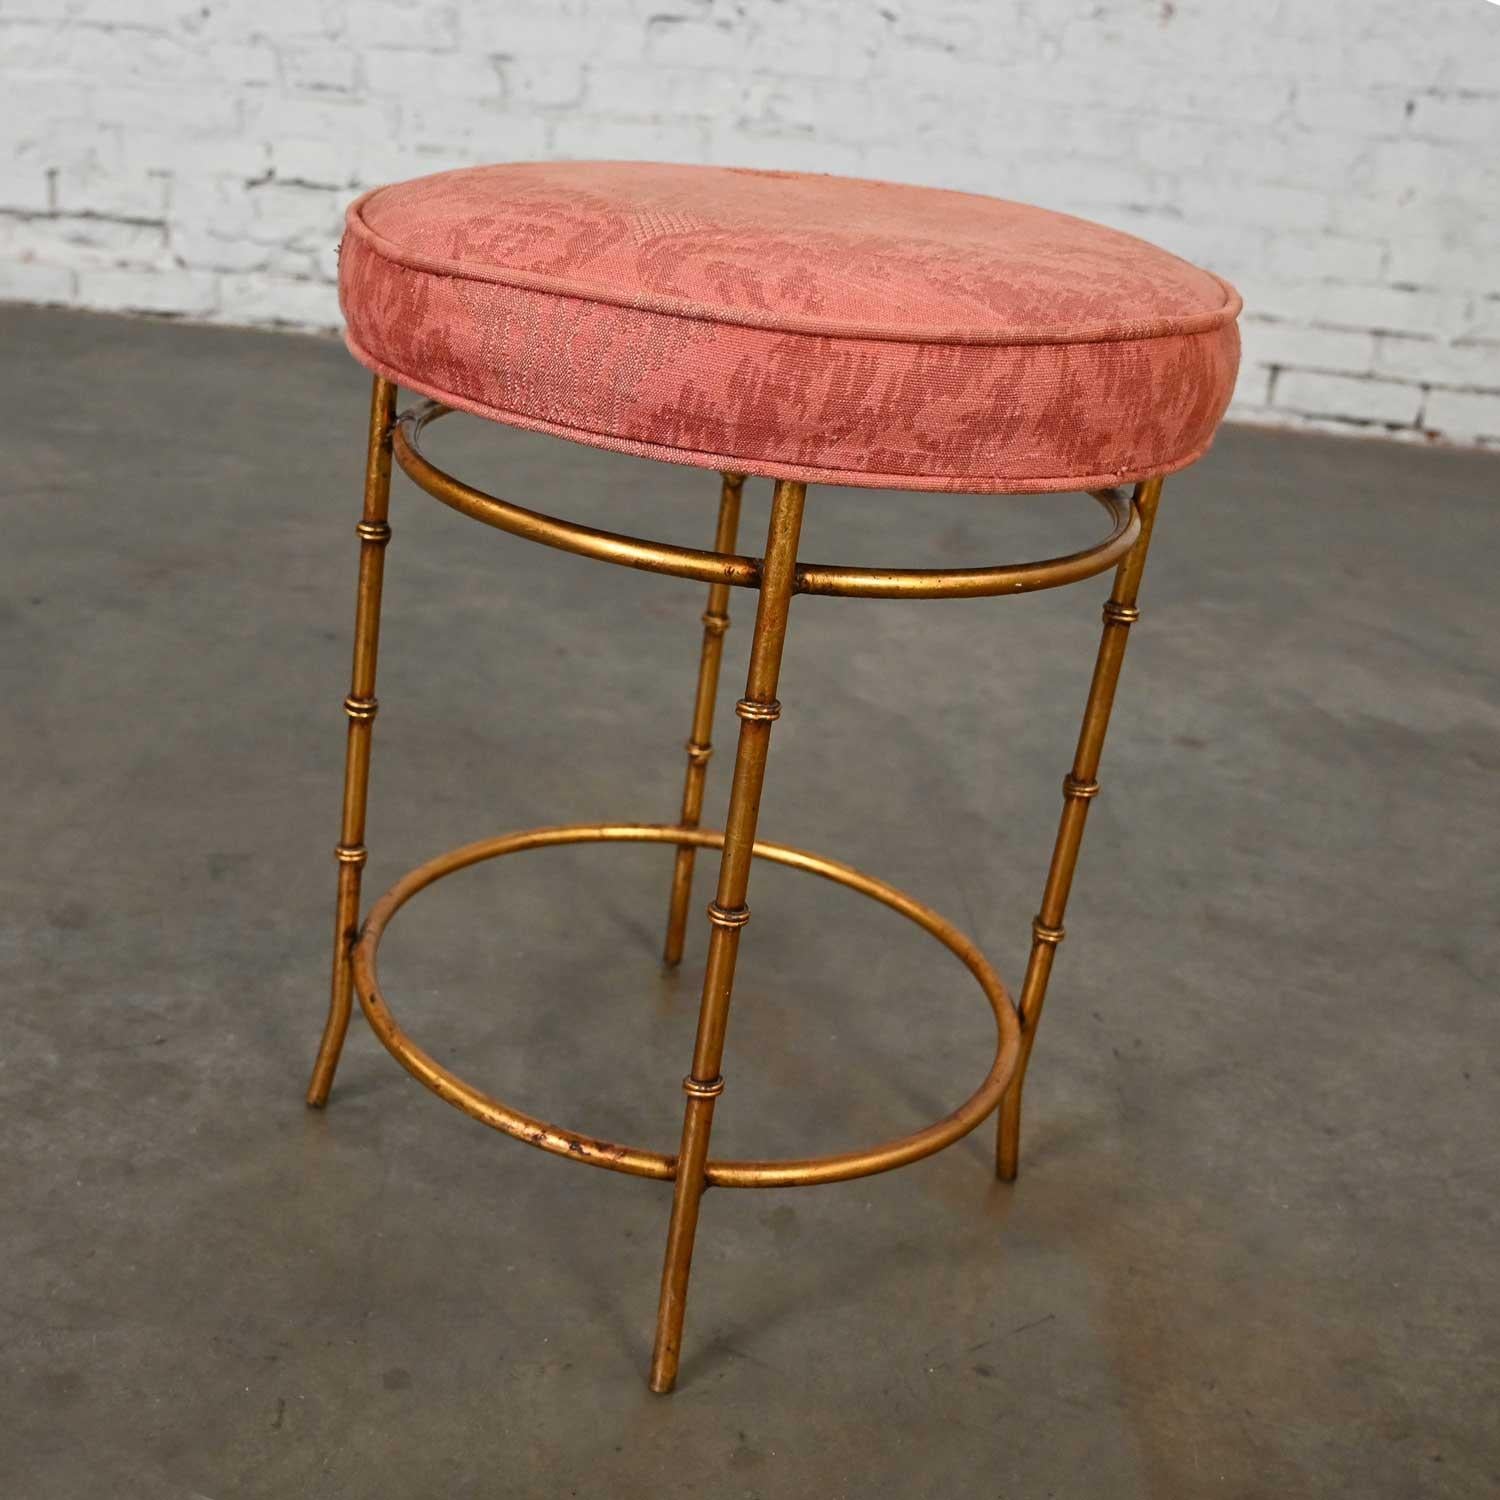 Mid 20th Italian Style Round Stool Rose Damask Seat Gilt Metal Faux Bamboo Legs  In Good Condition For Sale In Topeka, KS